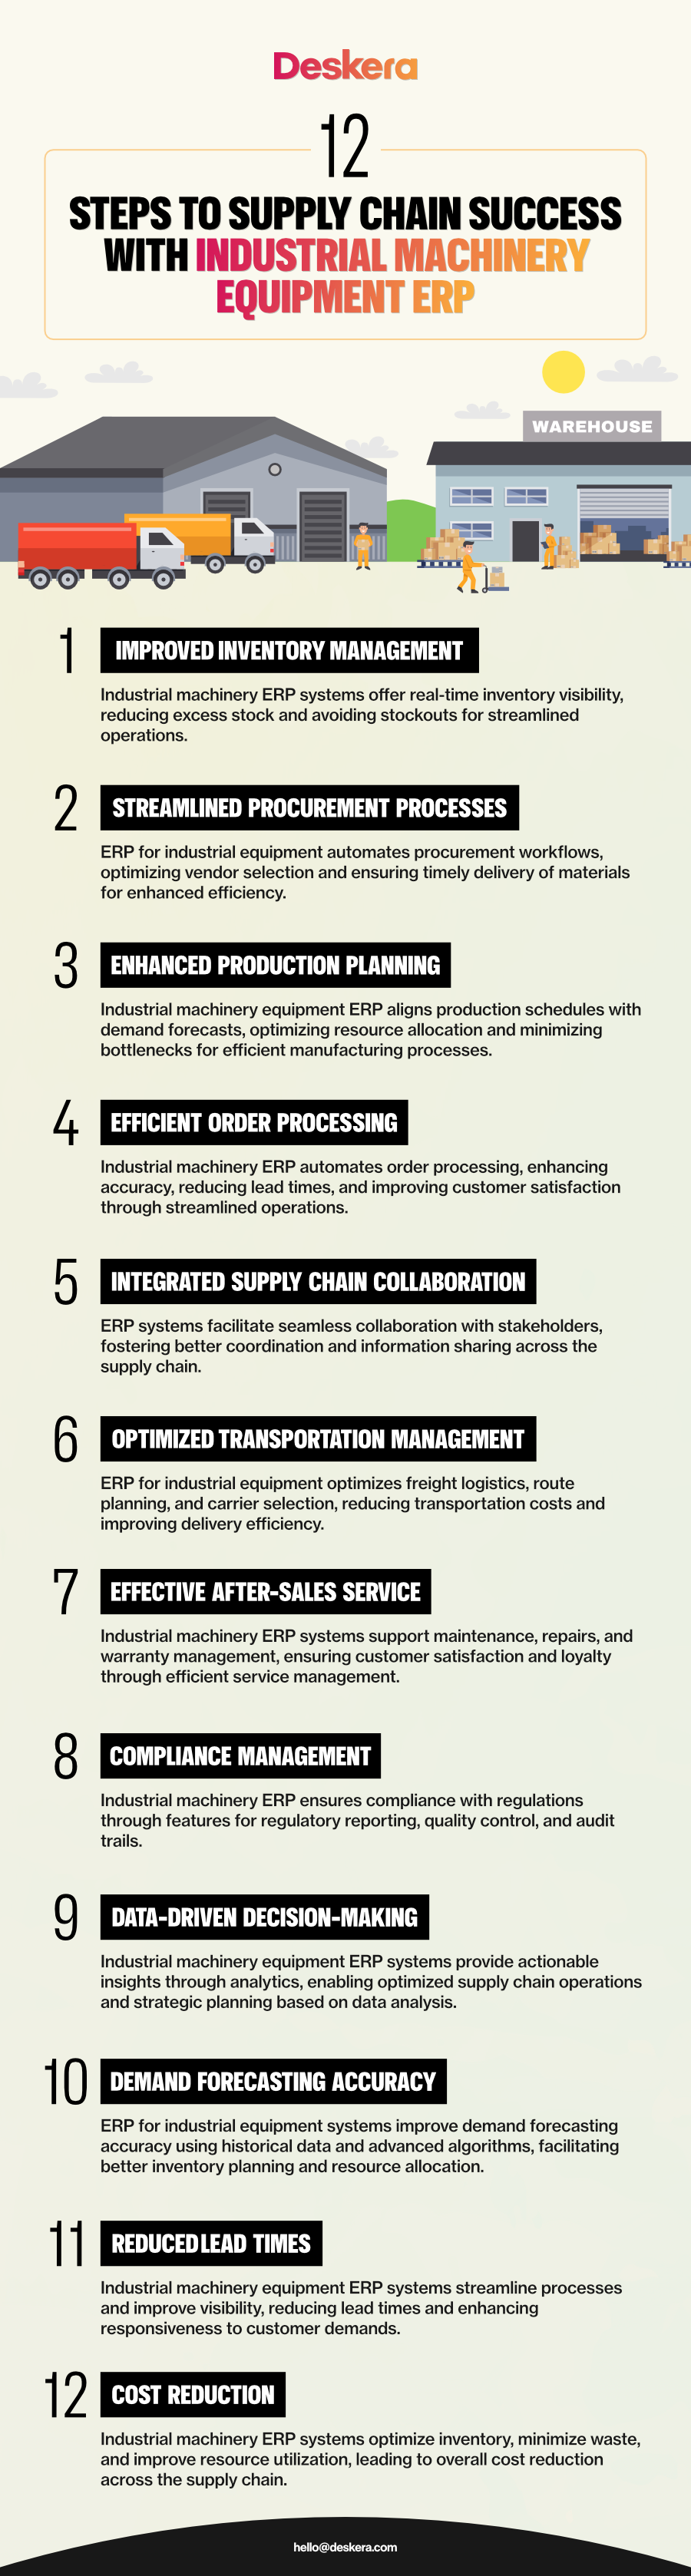 12 Steps to Supply Chain Success with Industrial Machinery Equipment ERP